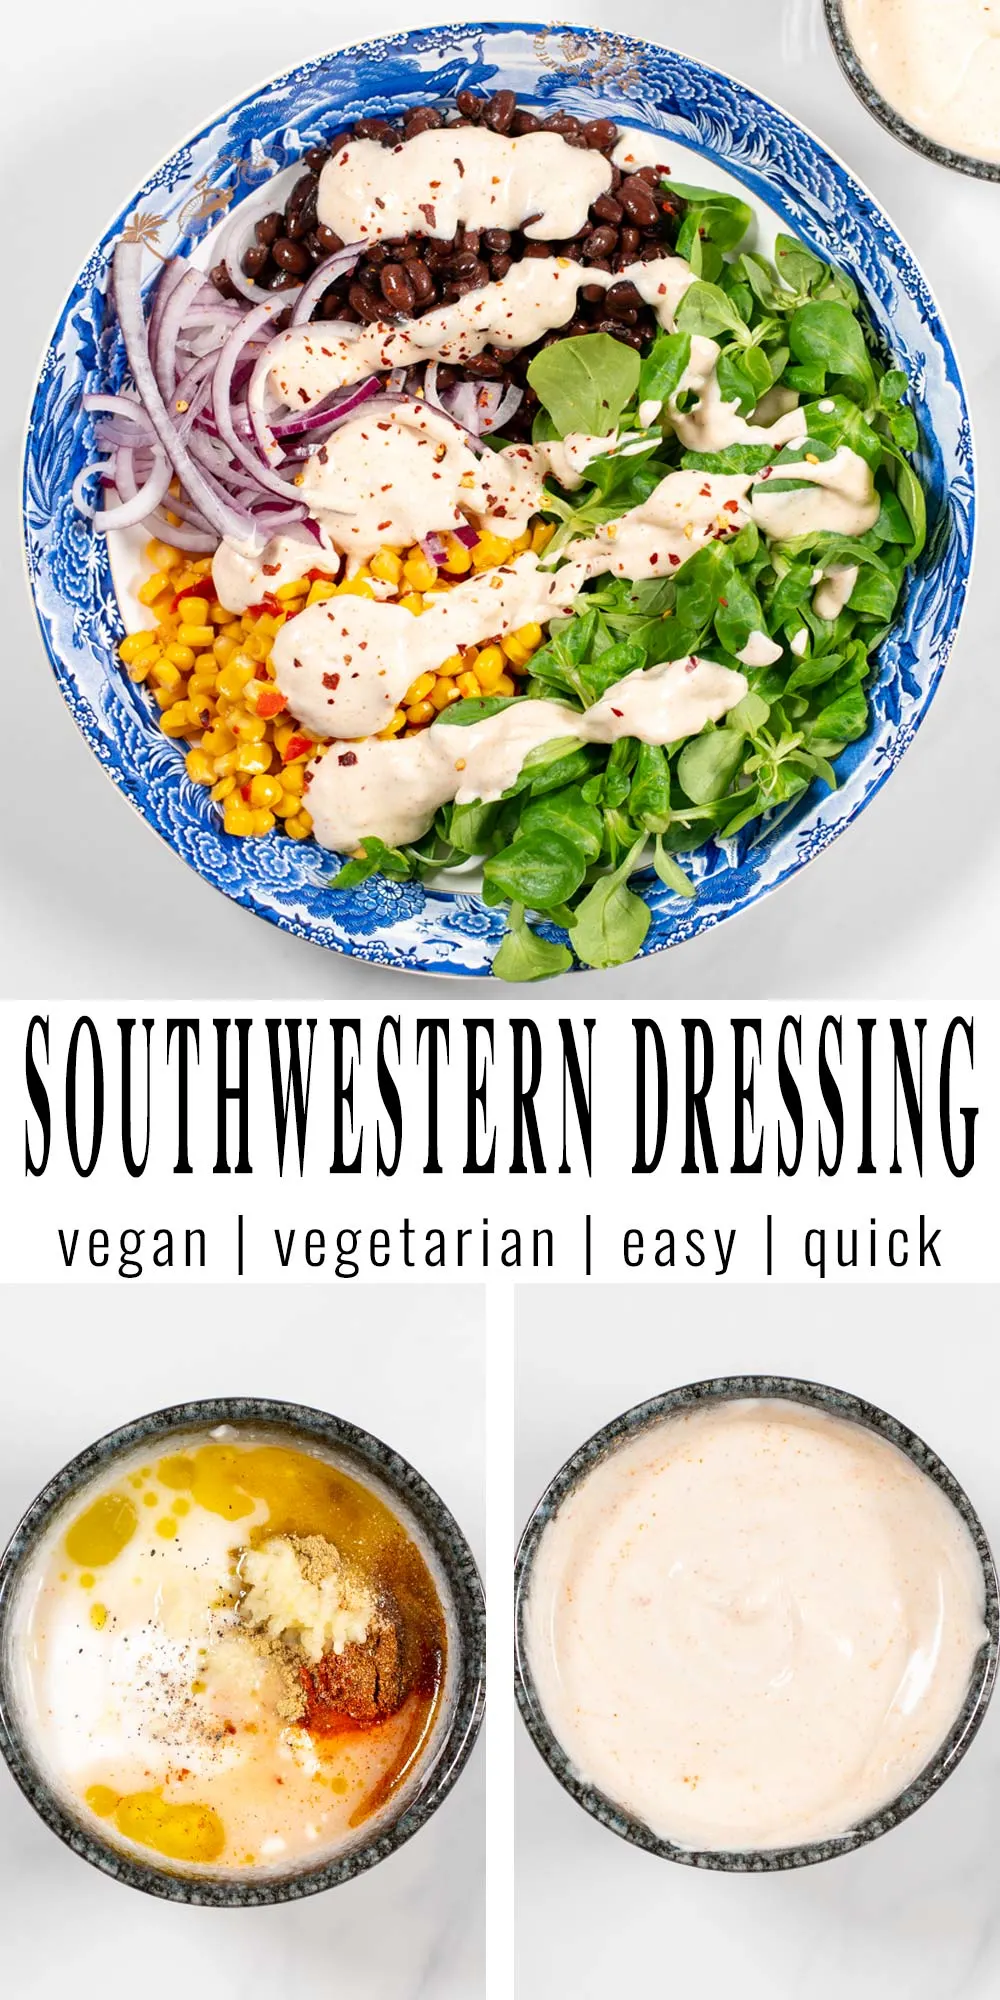 Collage of two photos of the Southwestern Salad Dressing.